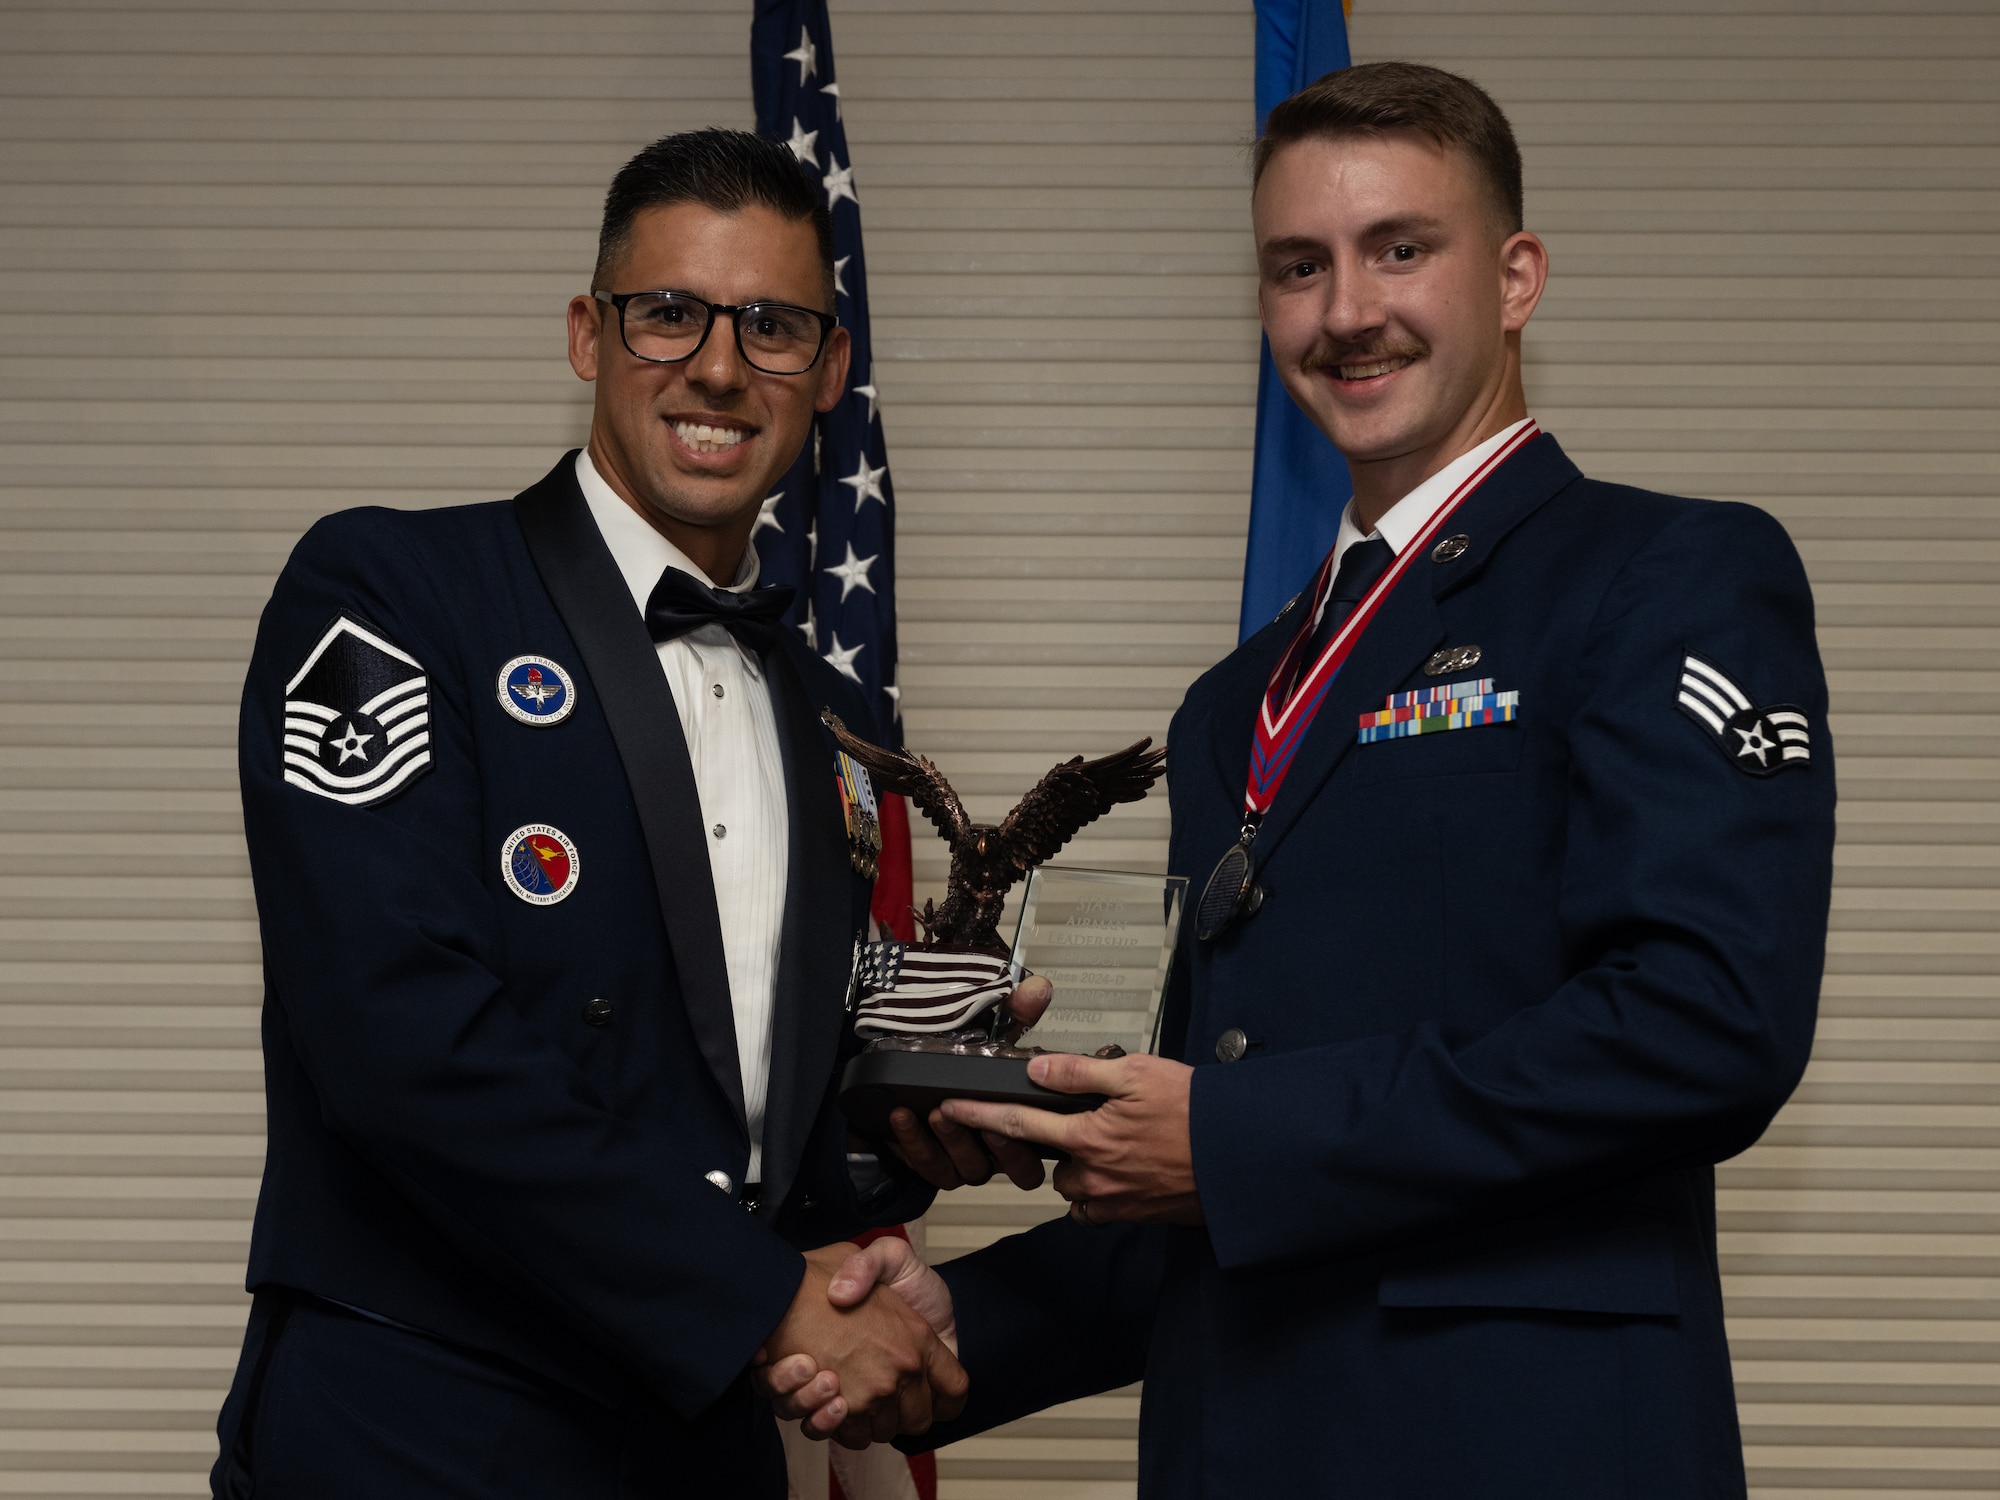 U.S. Air Force Senior Airman Ashton Neil, 4th Component Maintenance Squadron aerospace propulsion tech, right, receives the Commandant’s Award from Master Sgt. Mark Benevides, Airman Leadership School instructor, during the ALS class 24-D graduation ceremony at Seymour Johnson Air Force Base, North Carolina, May 2, 2024. The Commandant’s Award is presented to an ALS graduate that possessed the highest degree of character, competence and commitment during the ALS course. (U.S. Air Force photo by Airman Megan Cusmano)